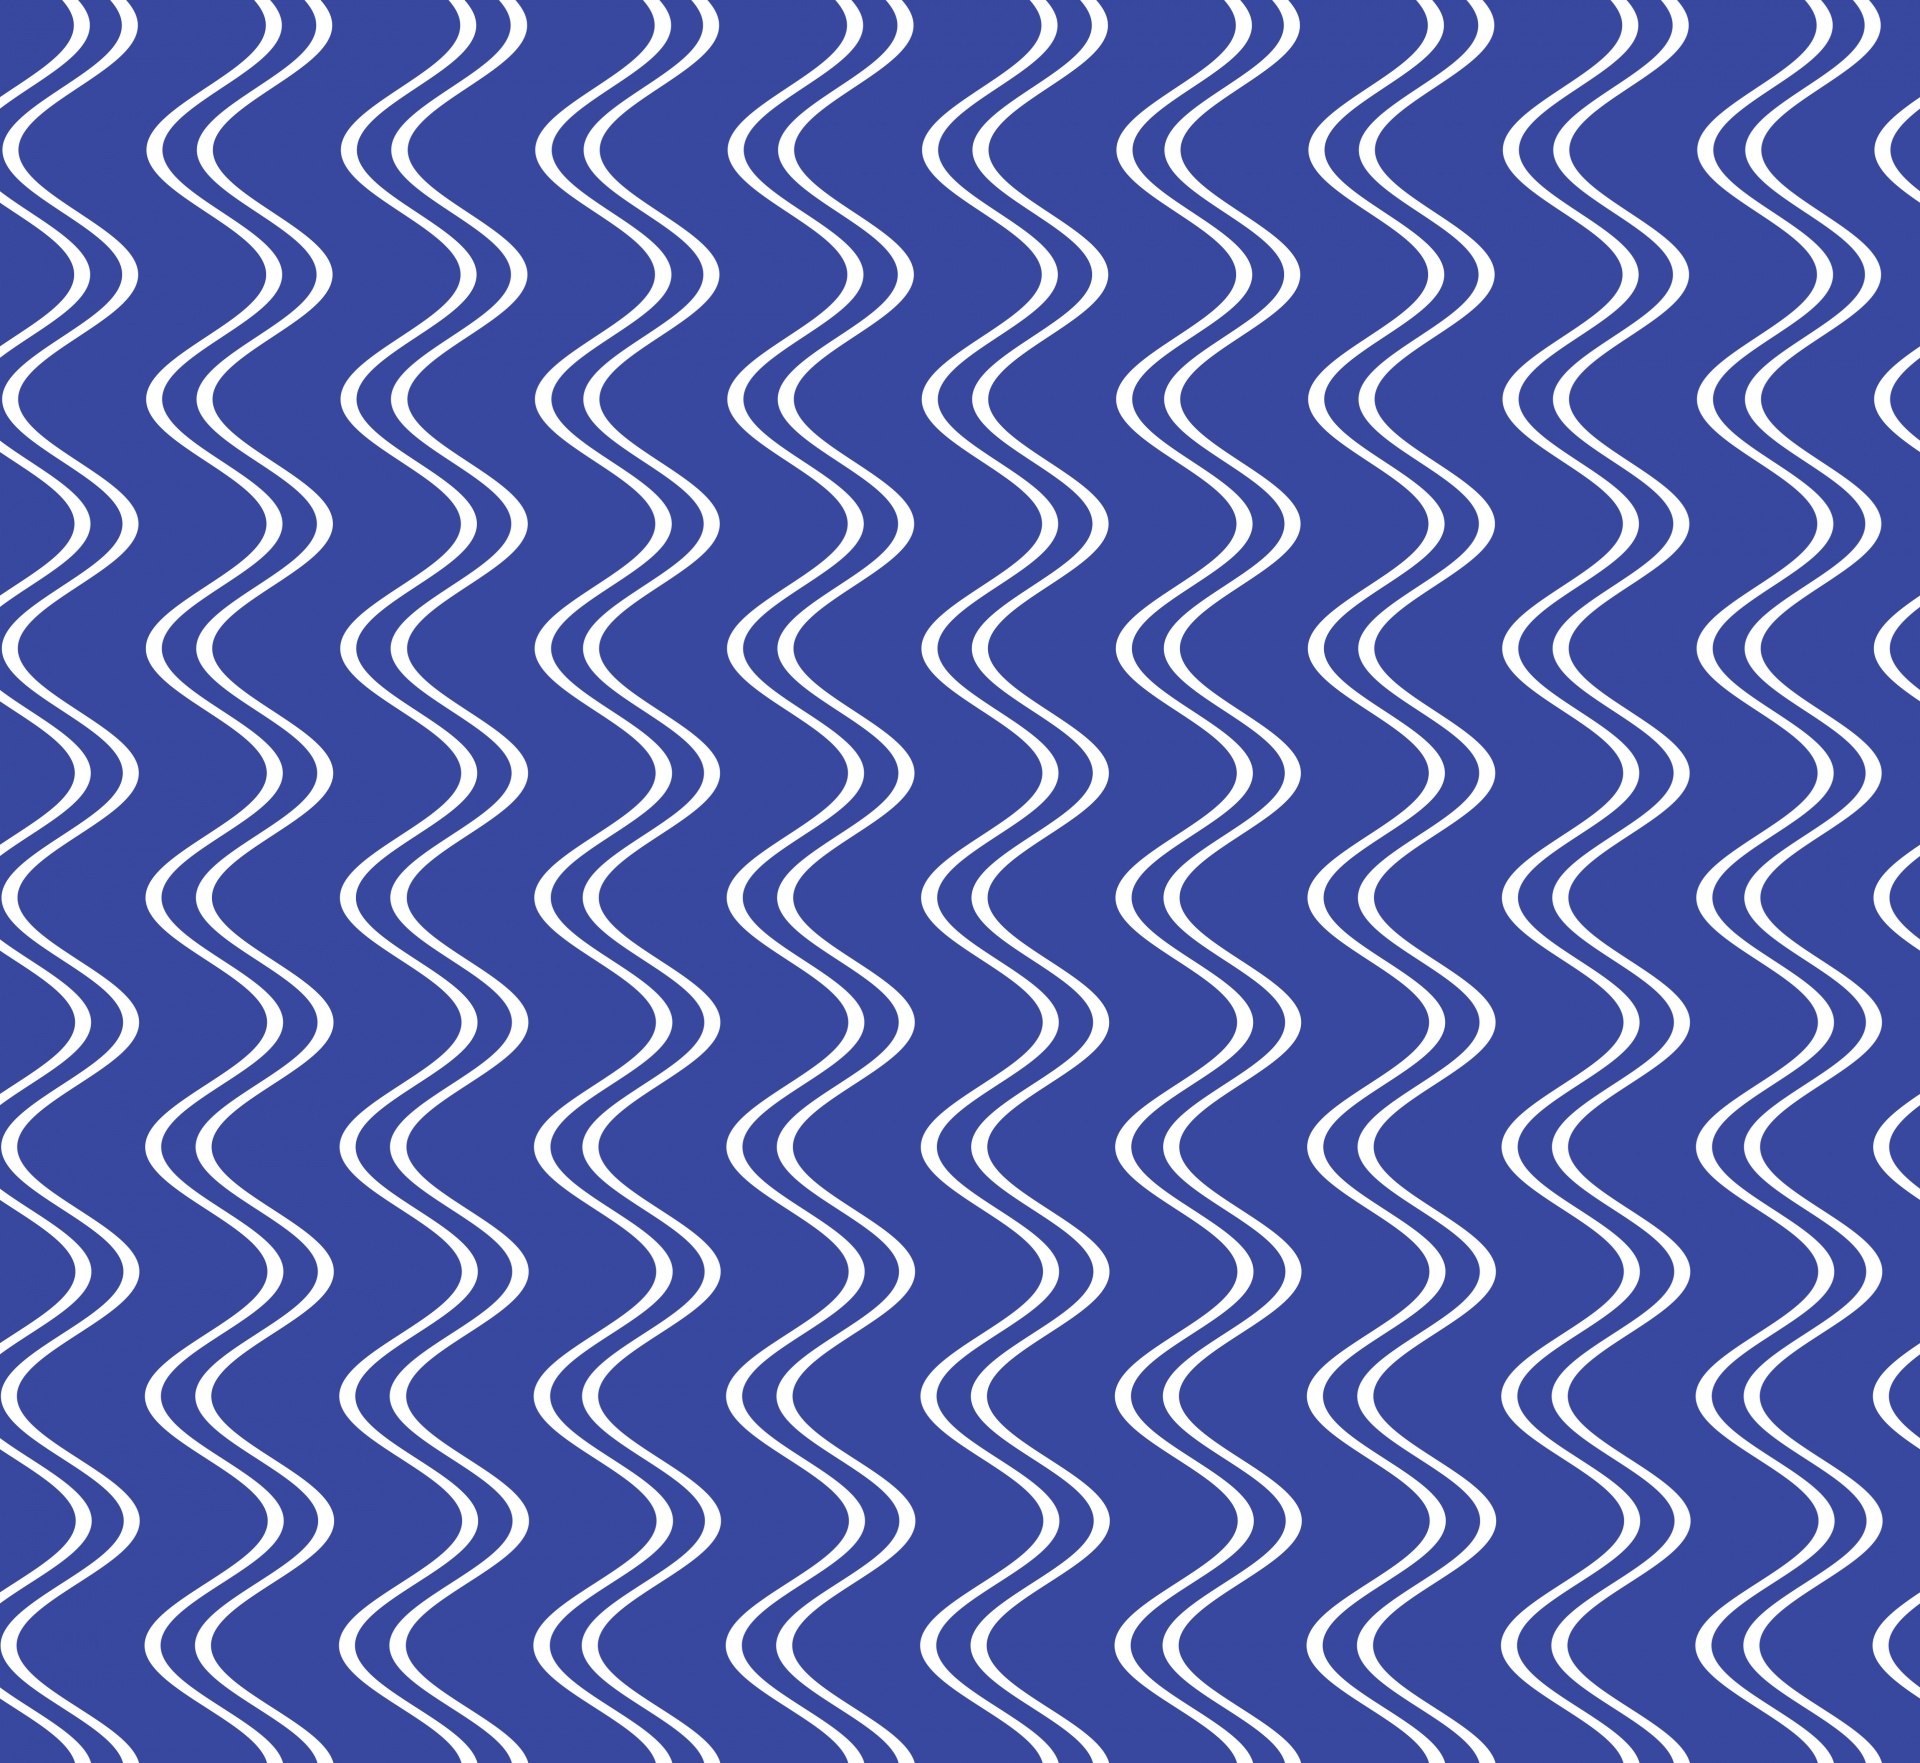 Wavy lines abstract blue and white wallpaper pattern background